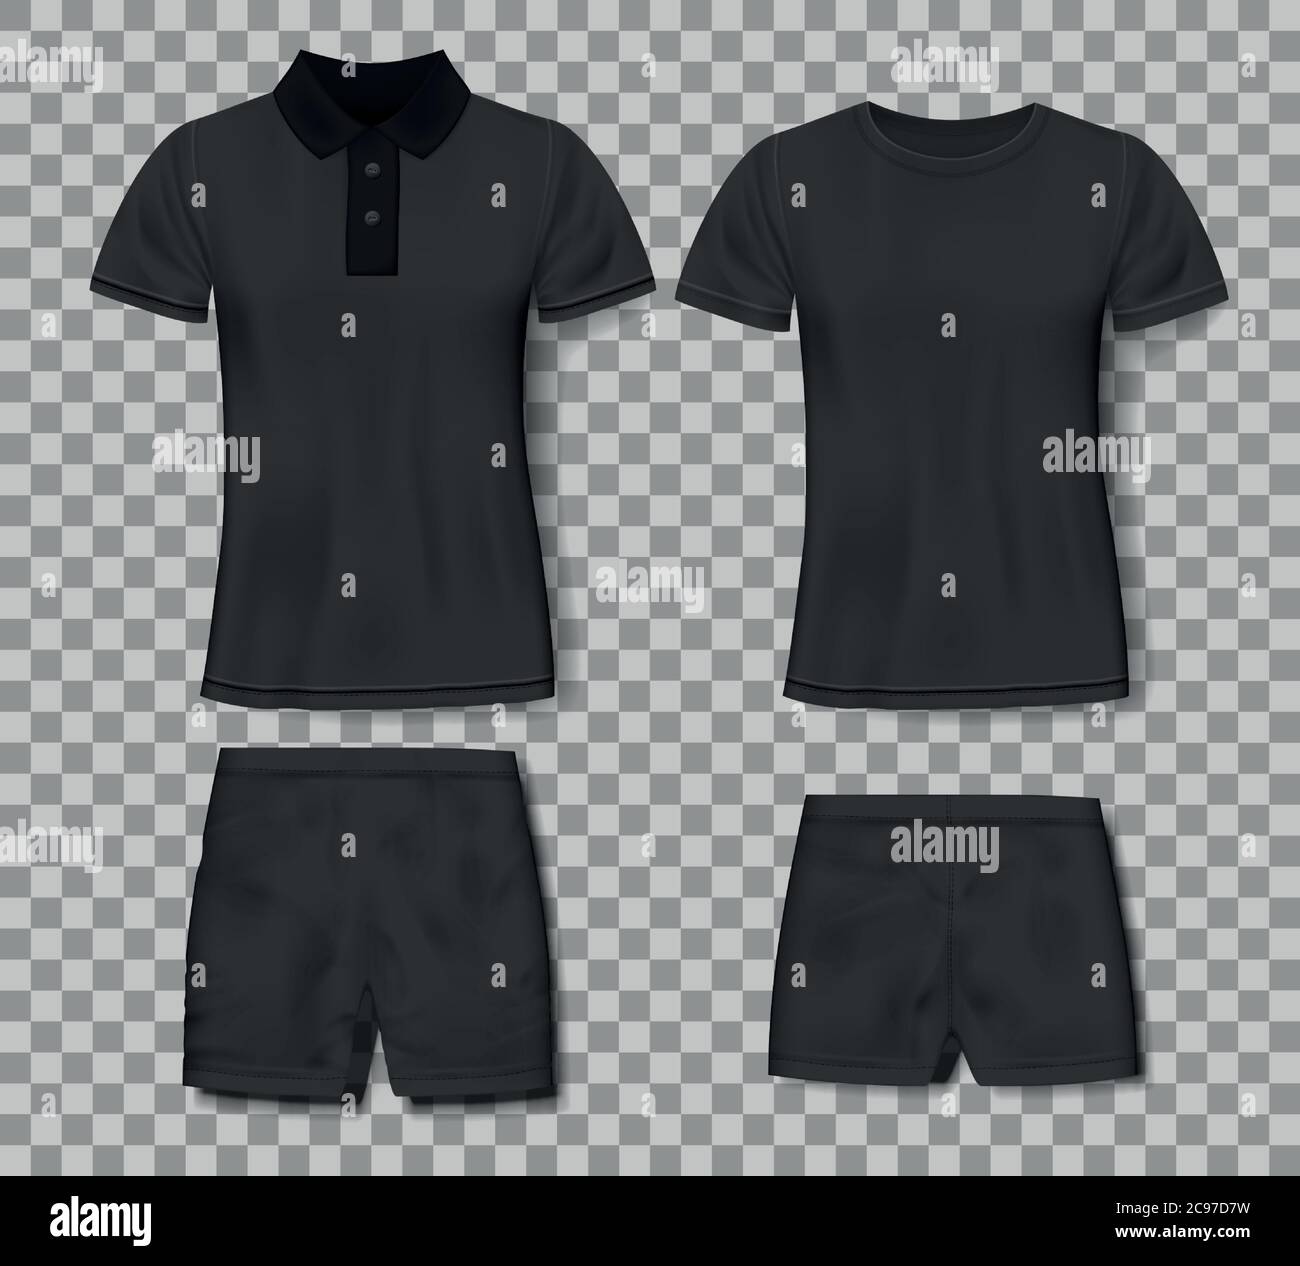 Black realistic slim male polo shirt and sport shorts design template. Set of t-shirts for sport, men classic polo. Vector illustration Stock Vector